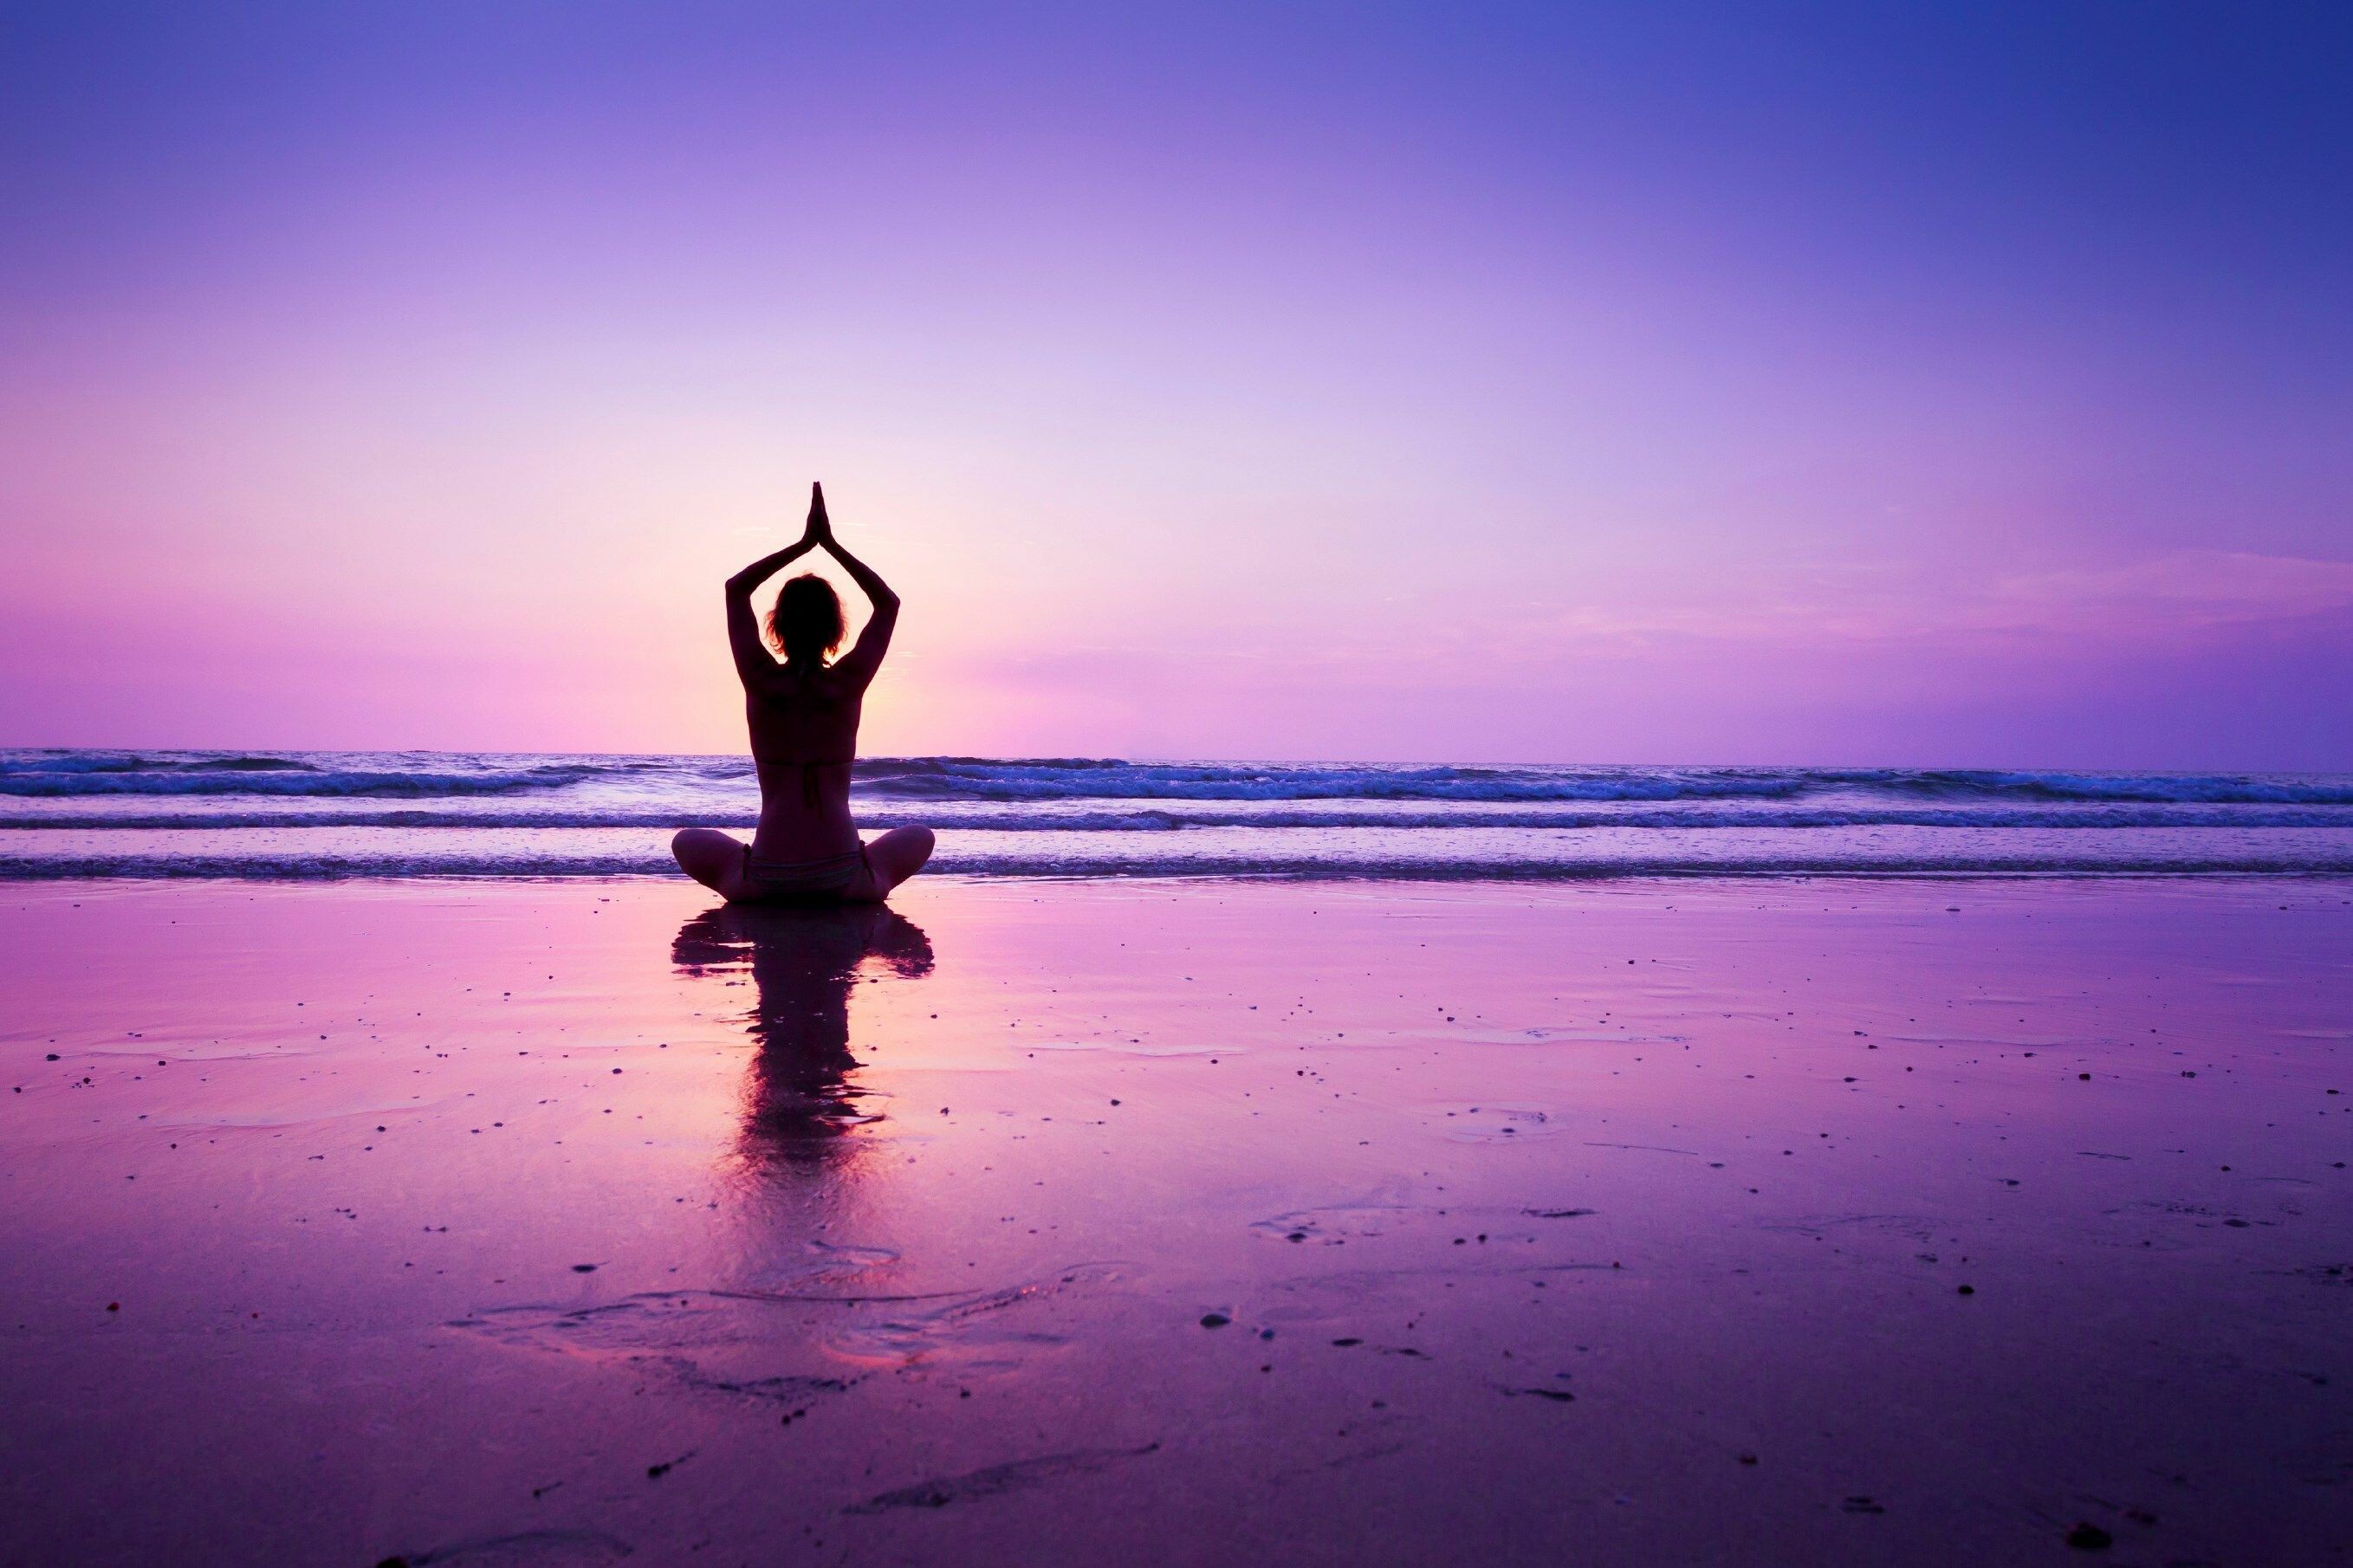 Yoga: A physical, mental and spiritual practice that originated in ancient India. 2720x1810 HD Wallpaper.